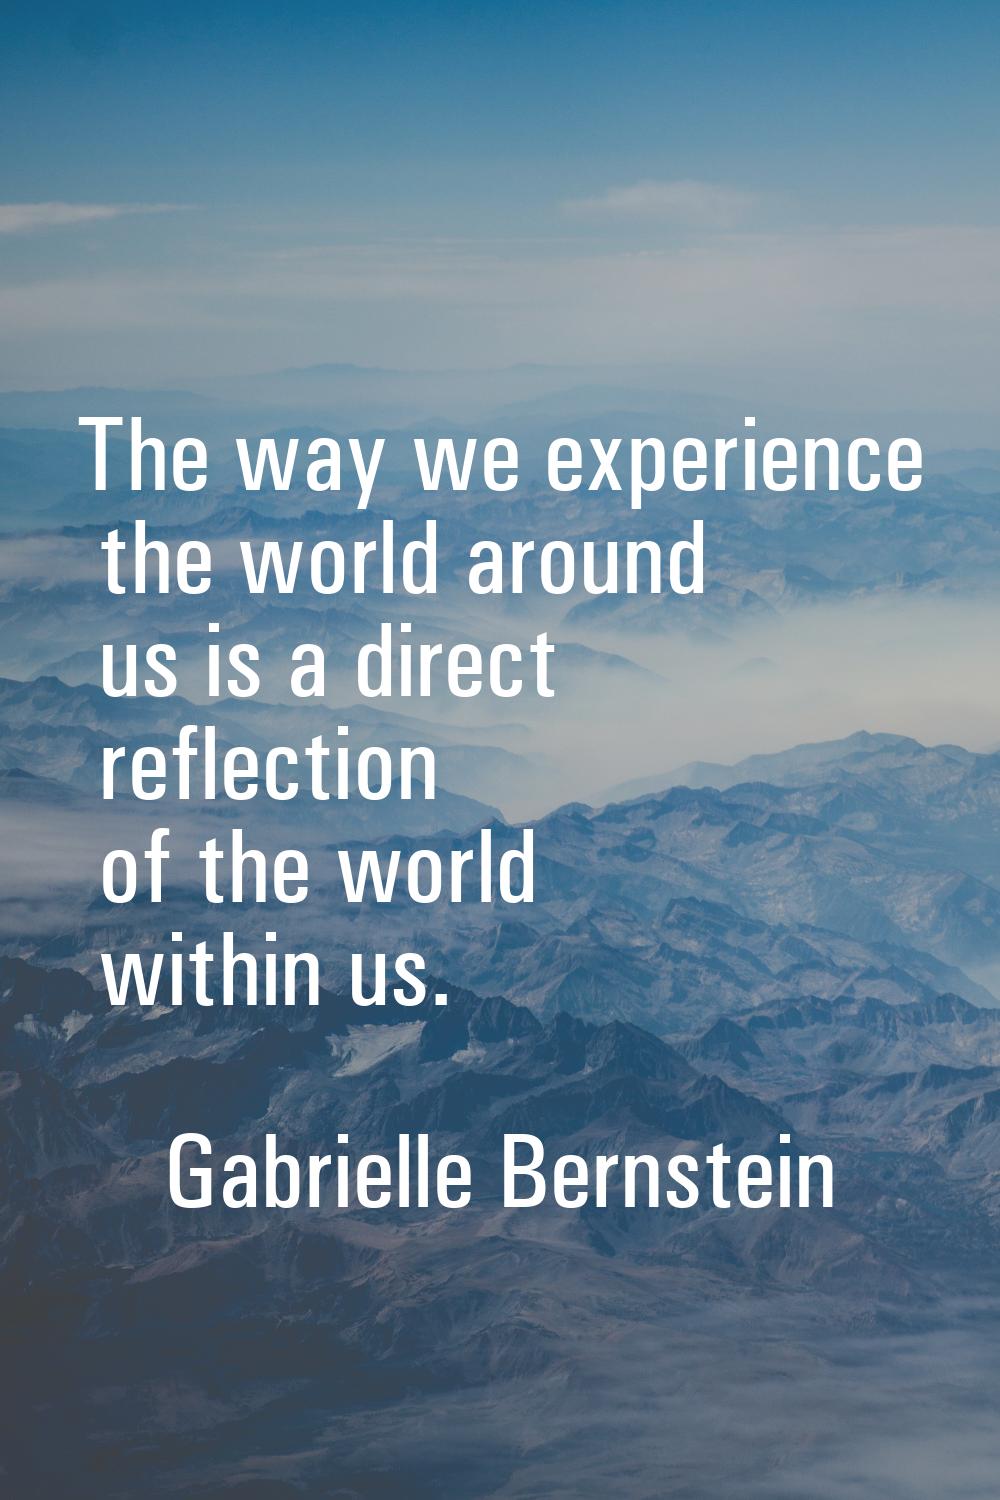 The way we experience the world around us is a direct reflection of the world within us.